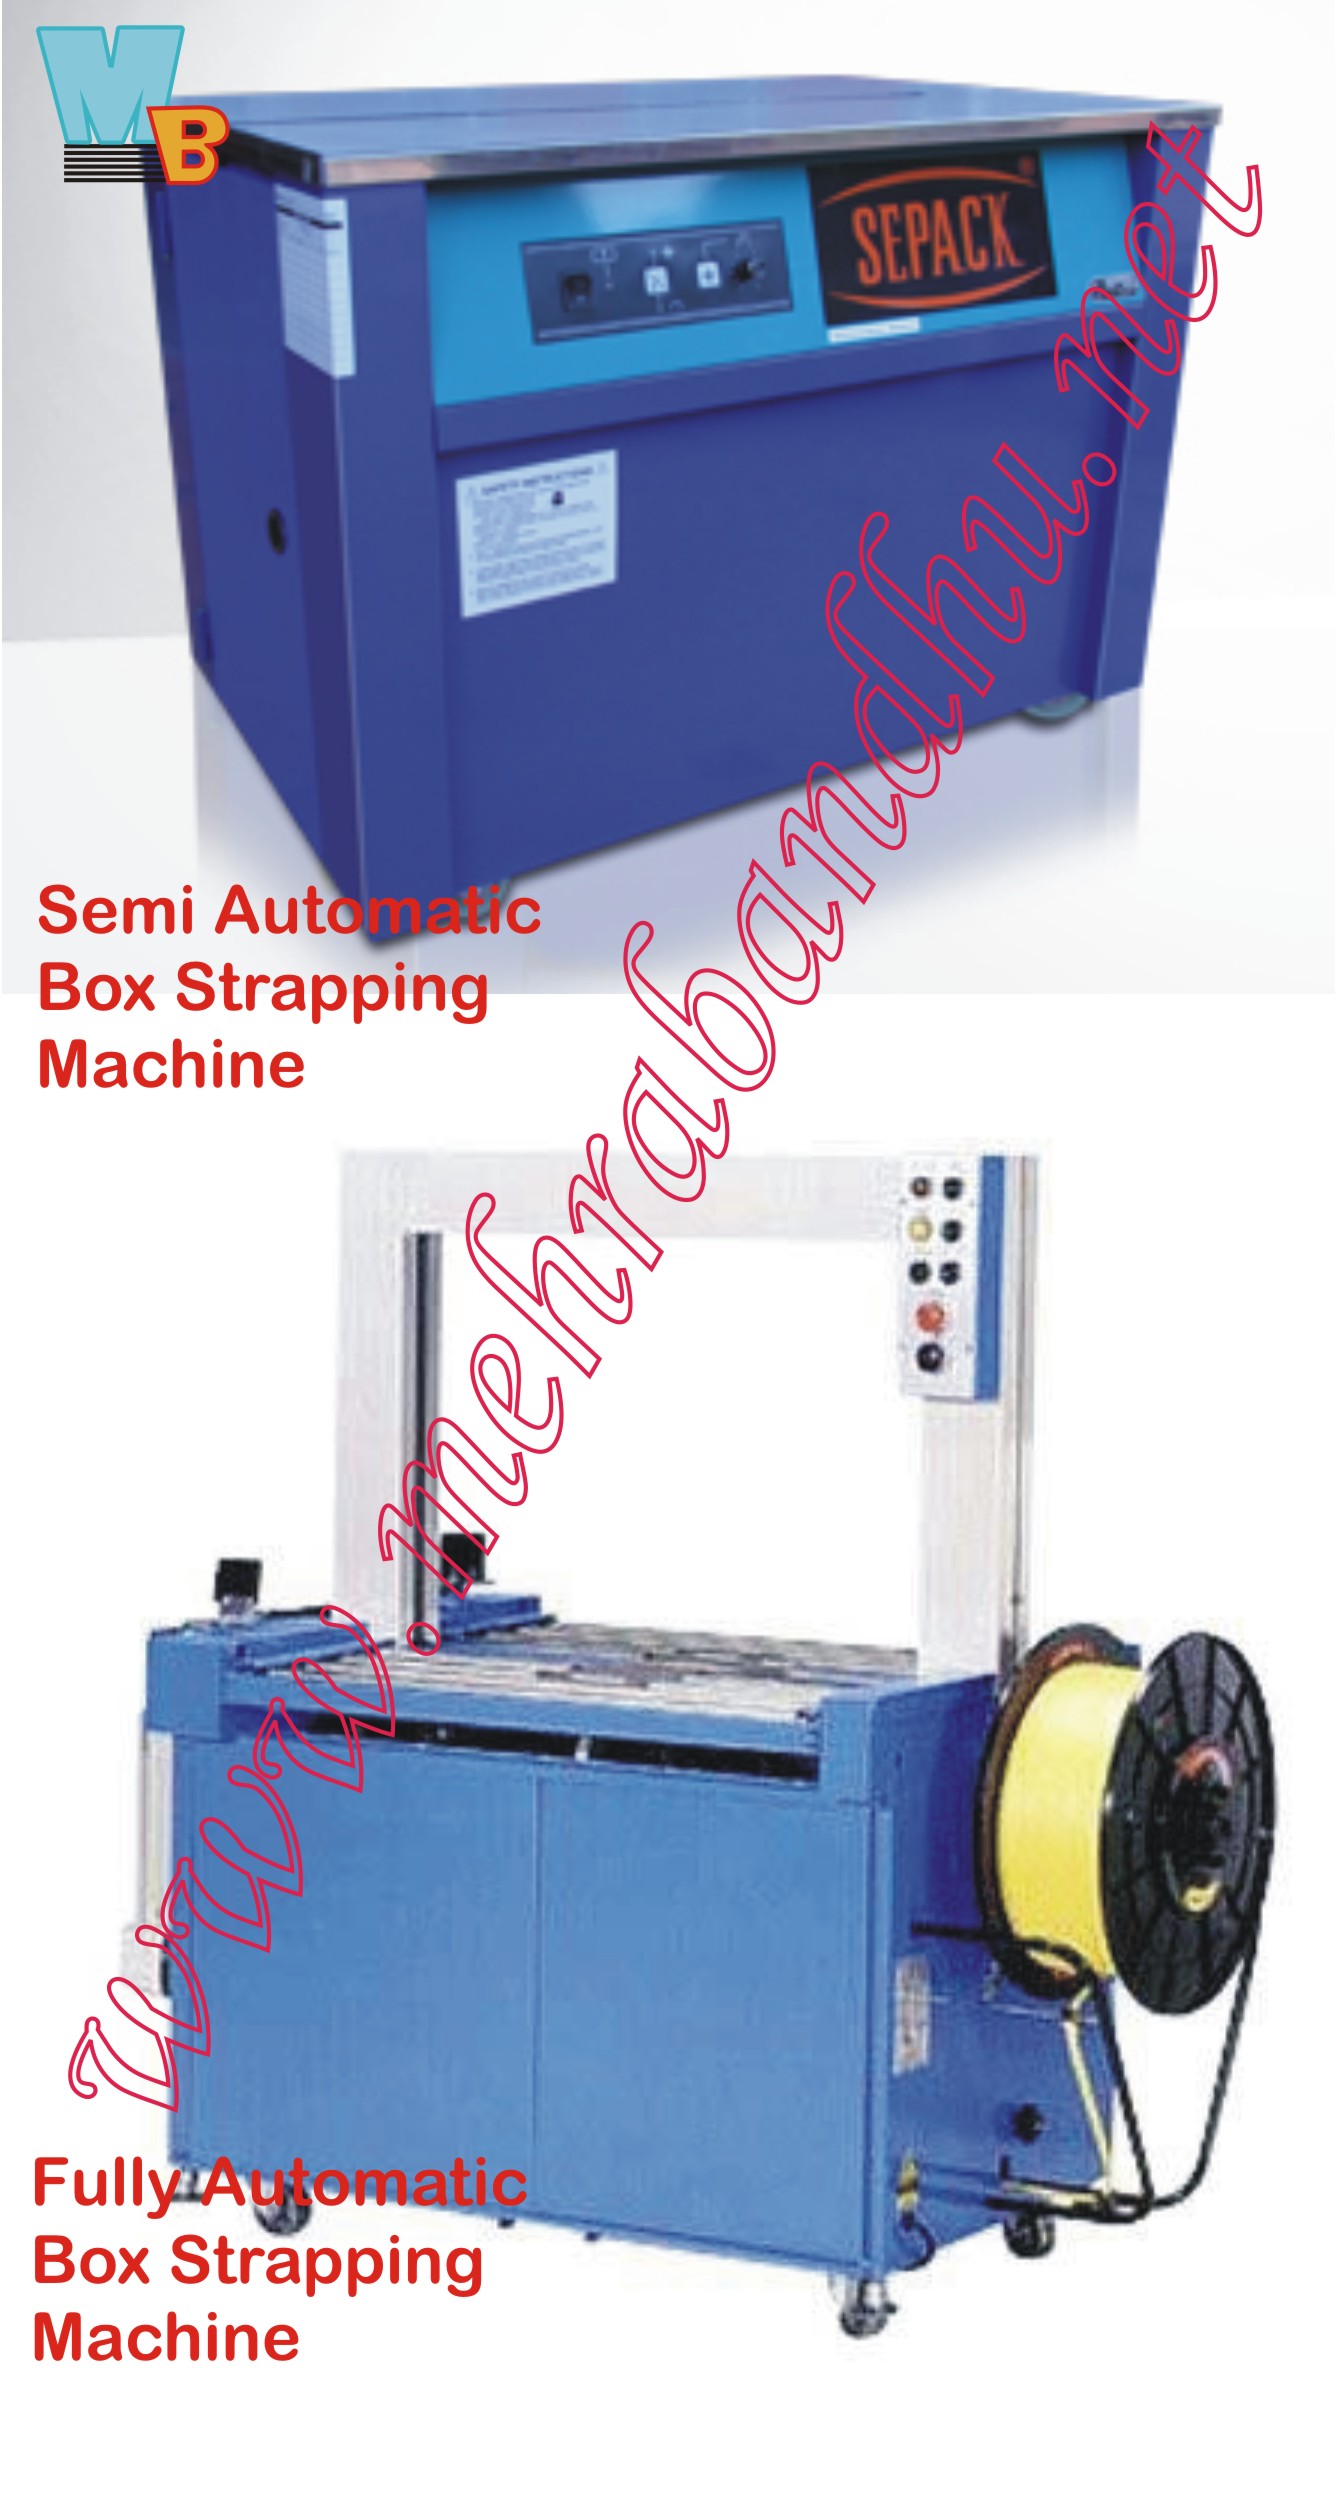 Manufacturers Exporters and Wholesale Suppliers of Fully Automatic Strapping machines Varanasi Uttar Pradesh